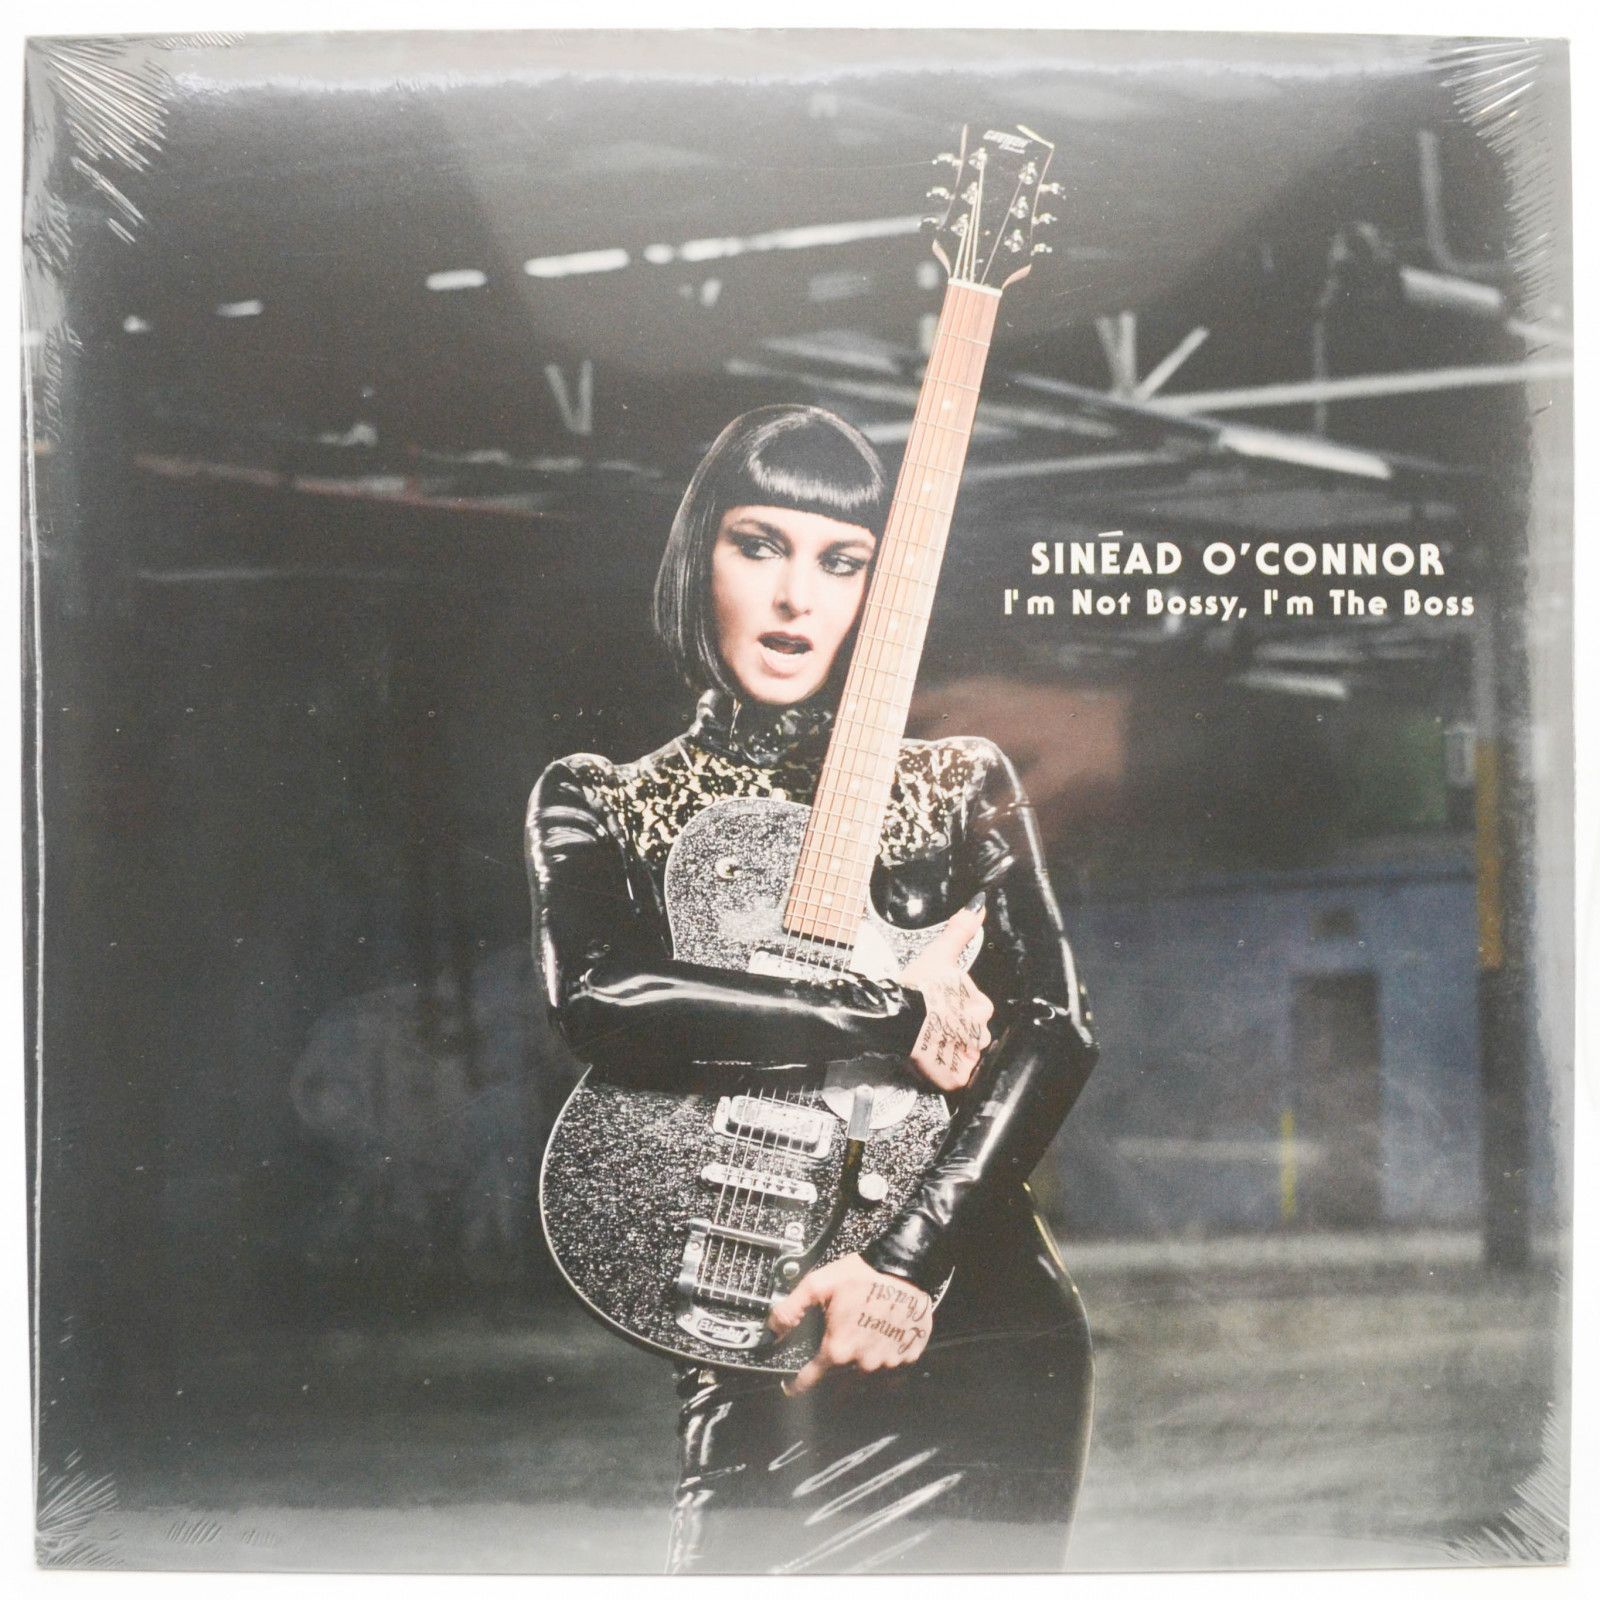 Sinéad O'Connor — I'm Not Bossy, I'm The Boss, 2004